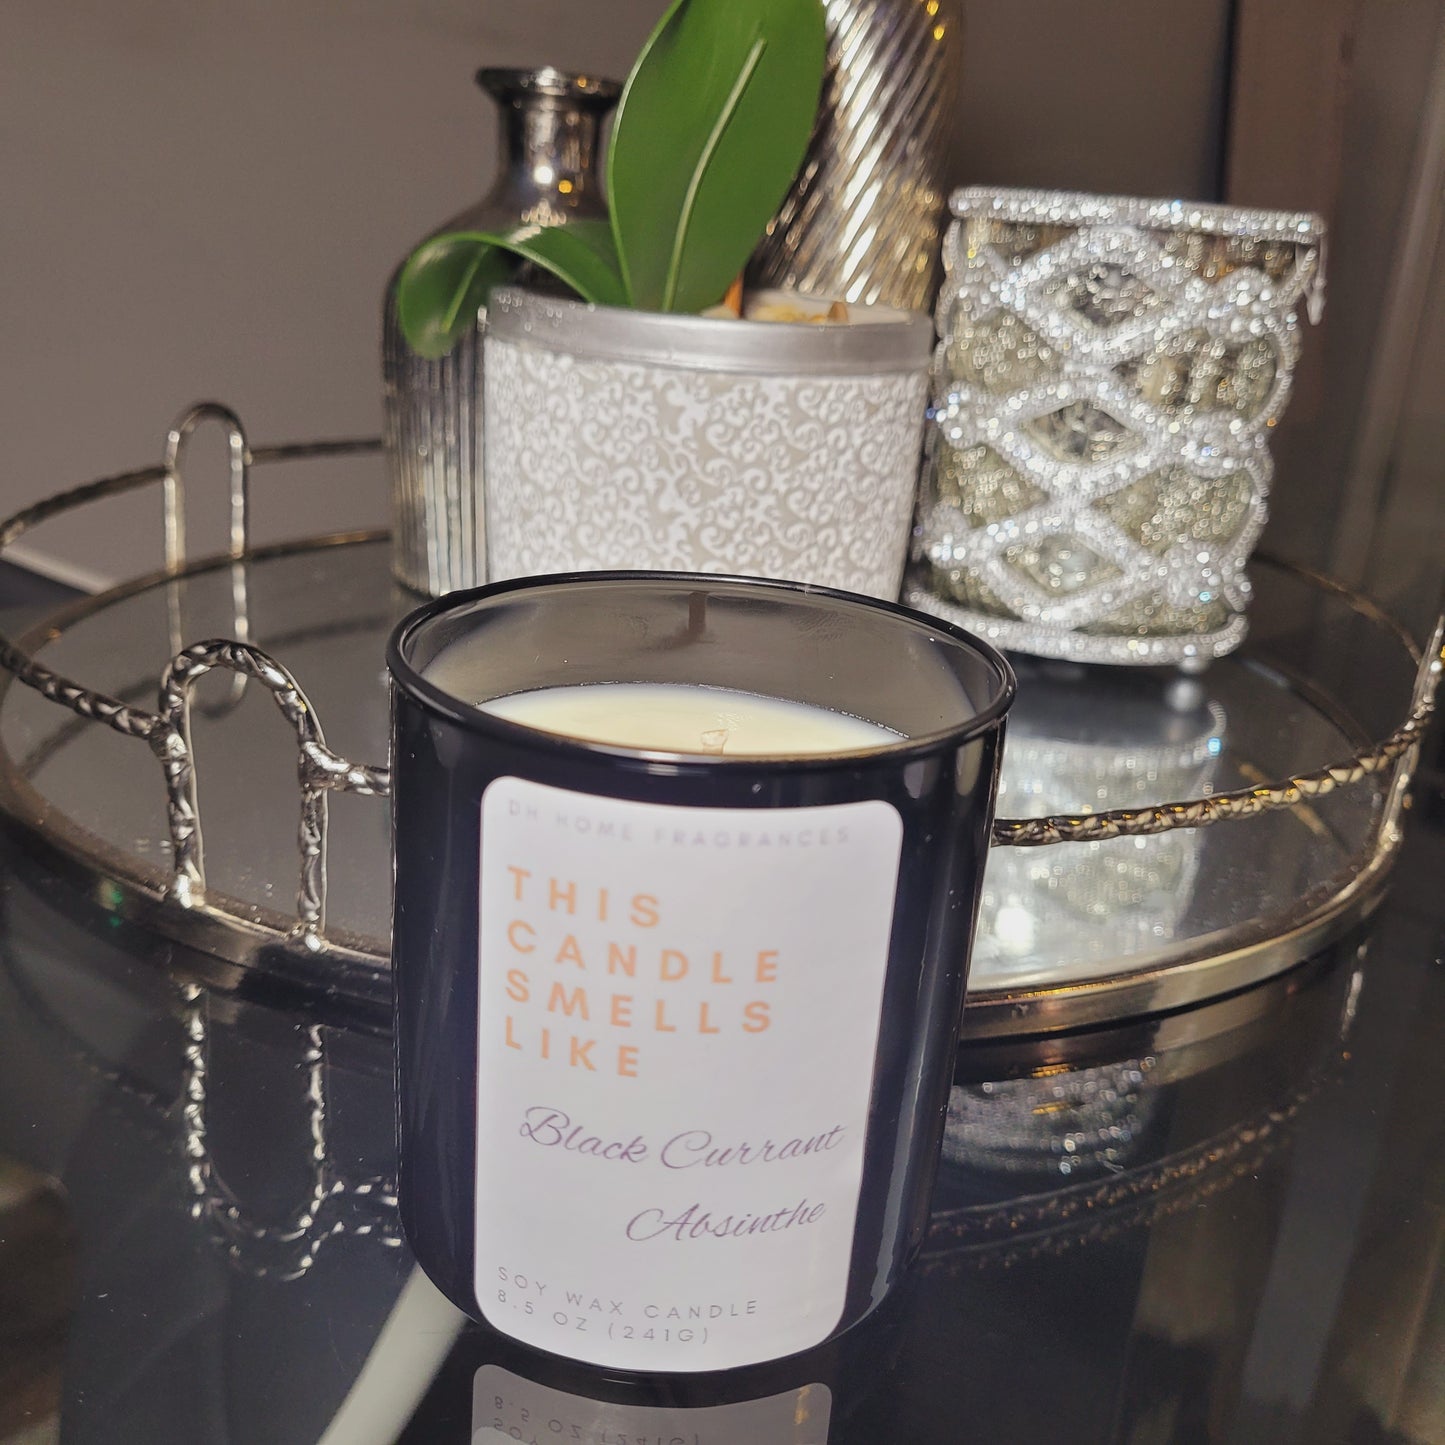 Black Currant Absinthe Soy Candle